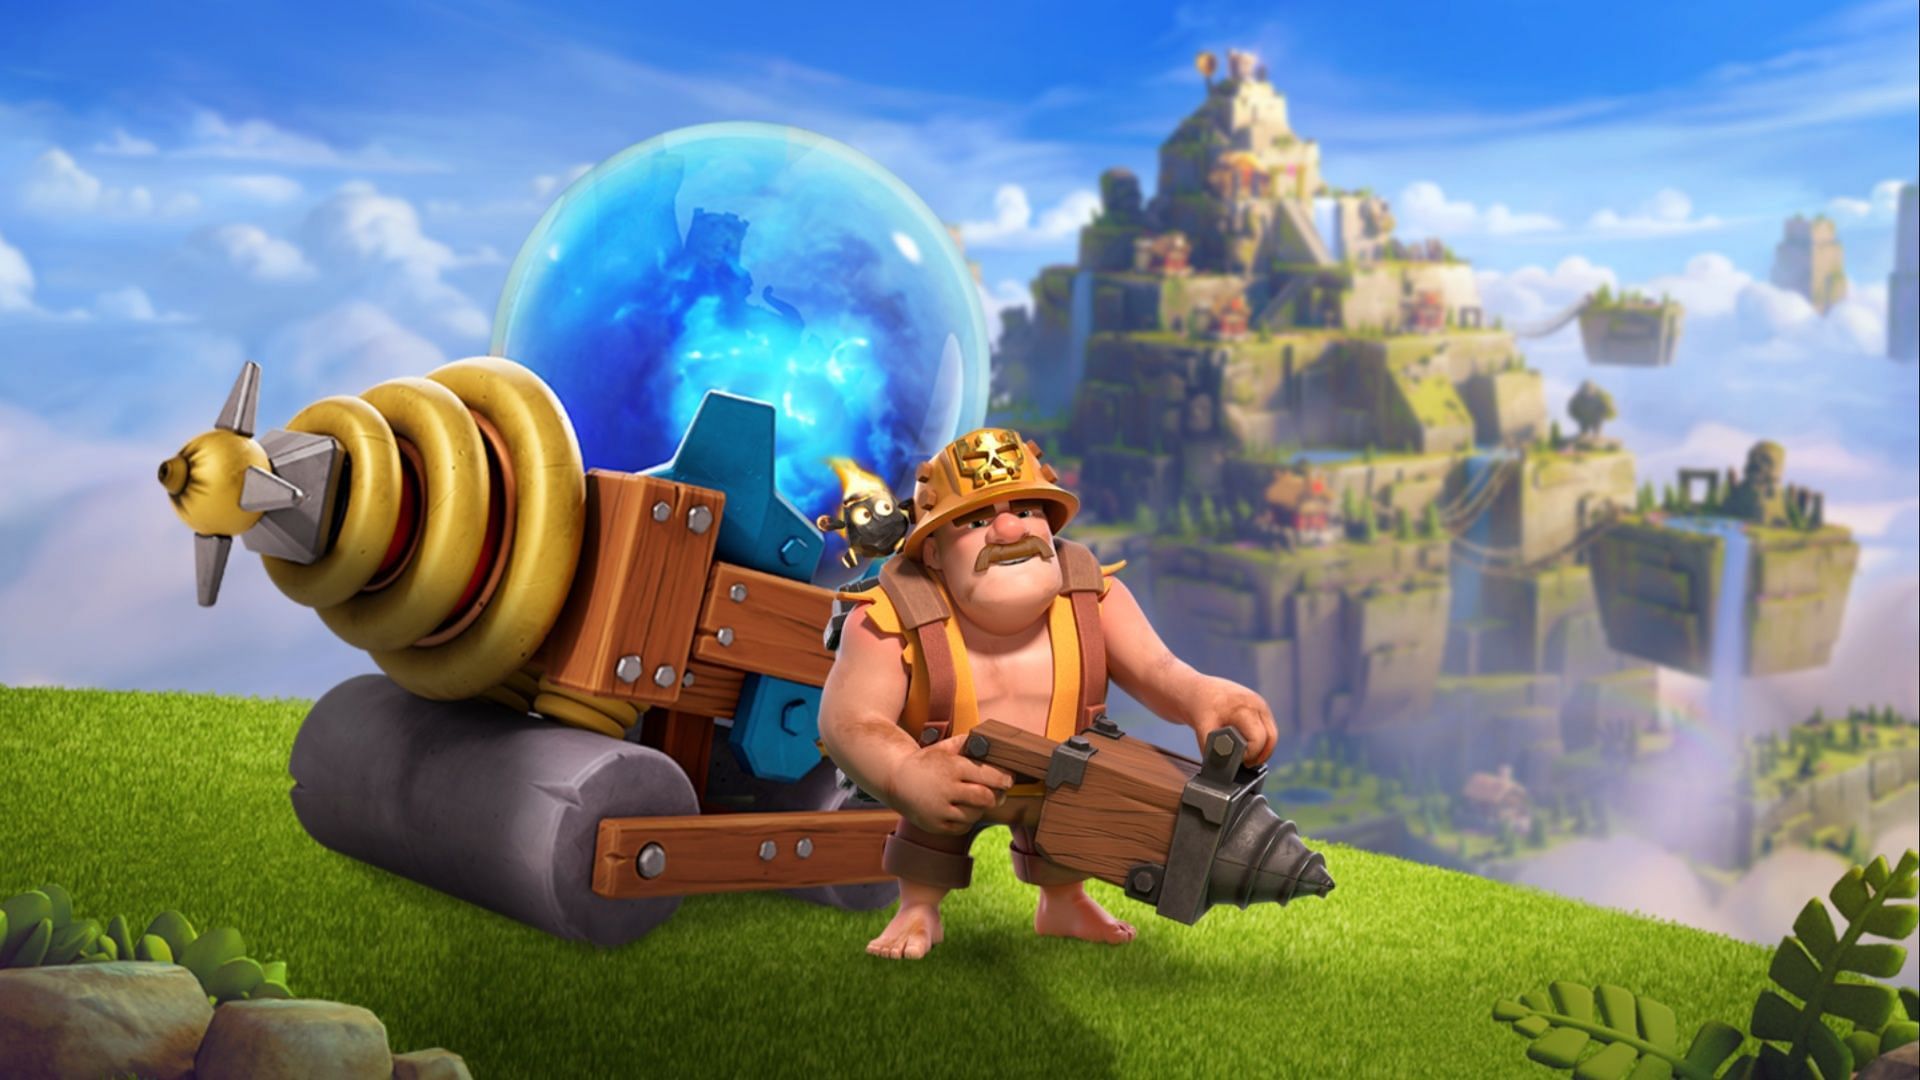 Clash of Clans October update is now live (Image via Supercell)